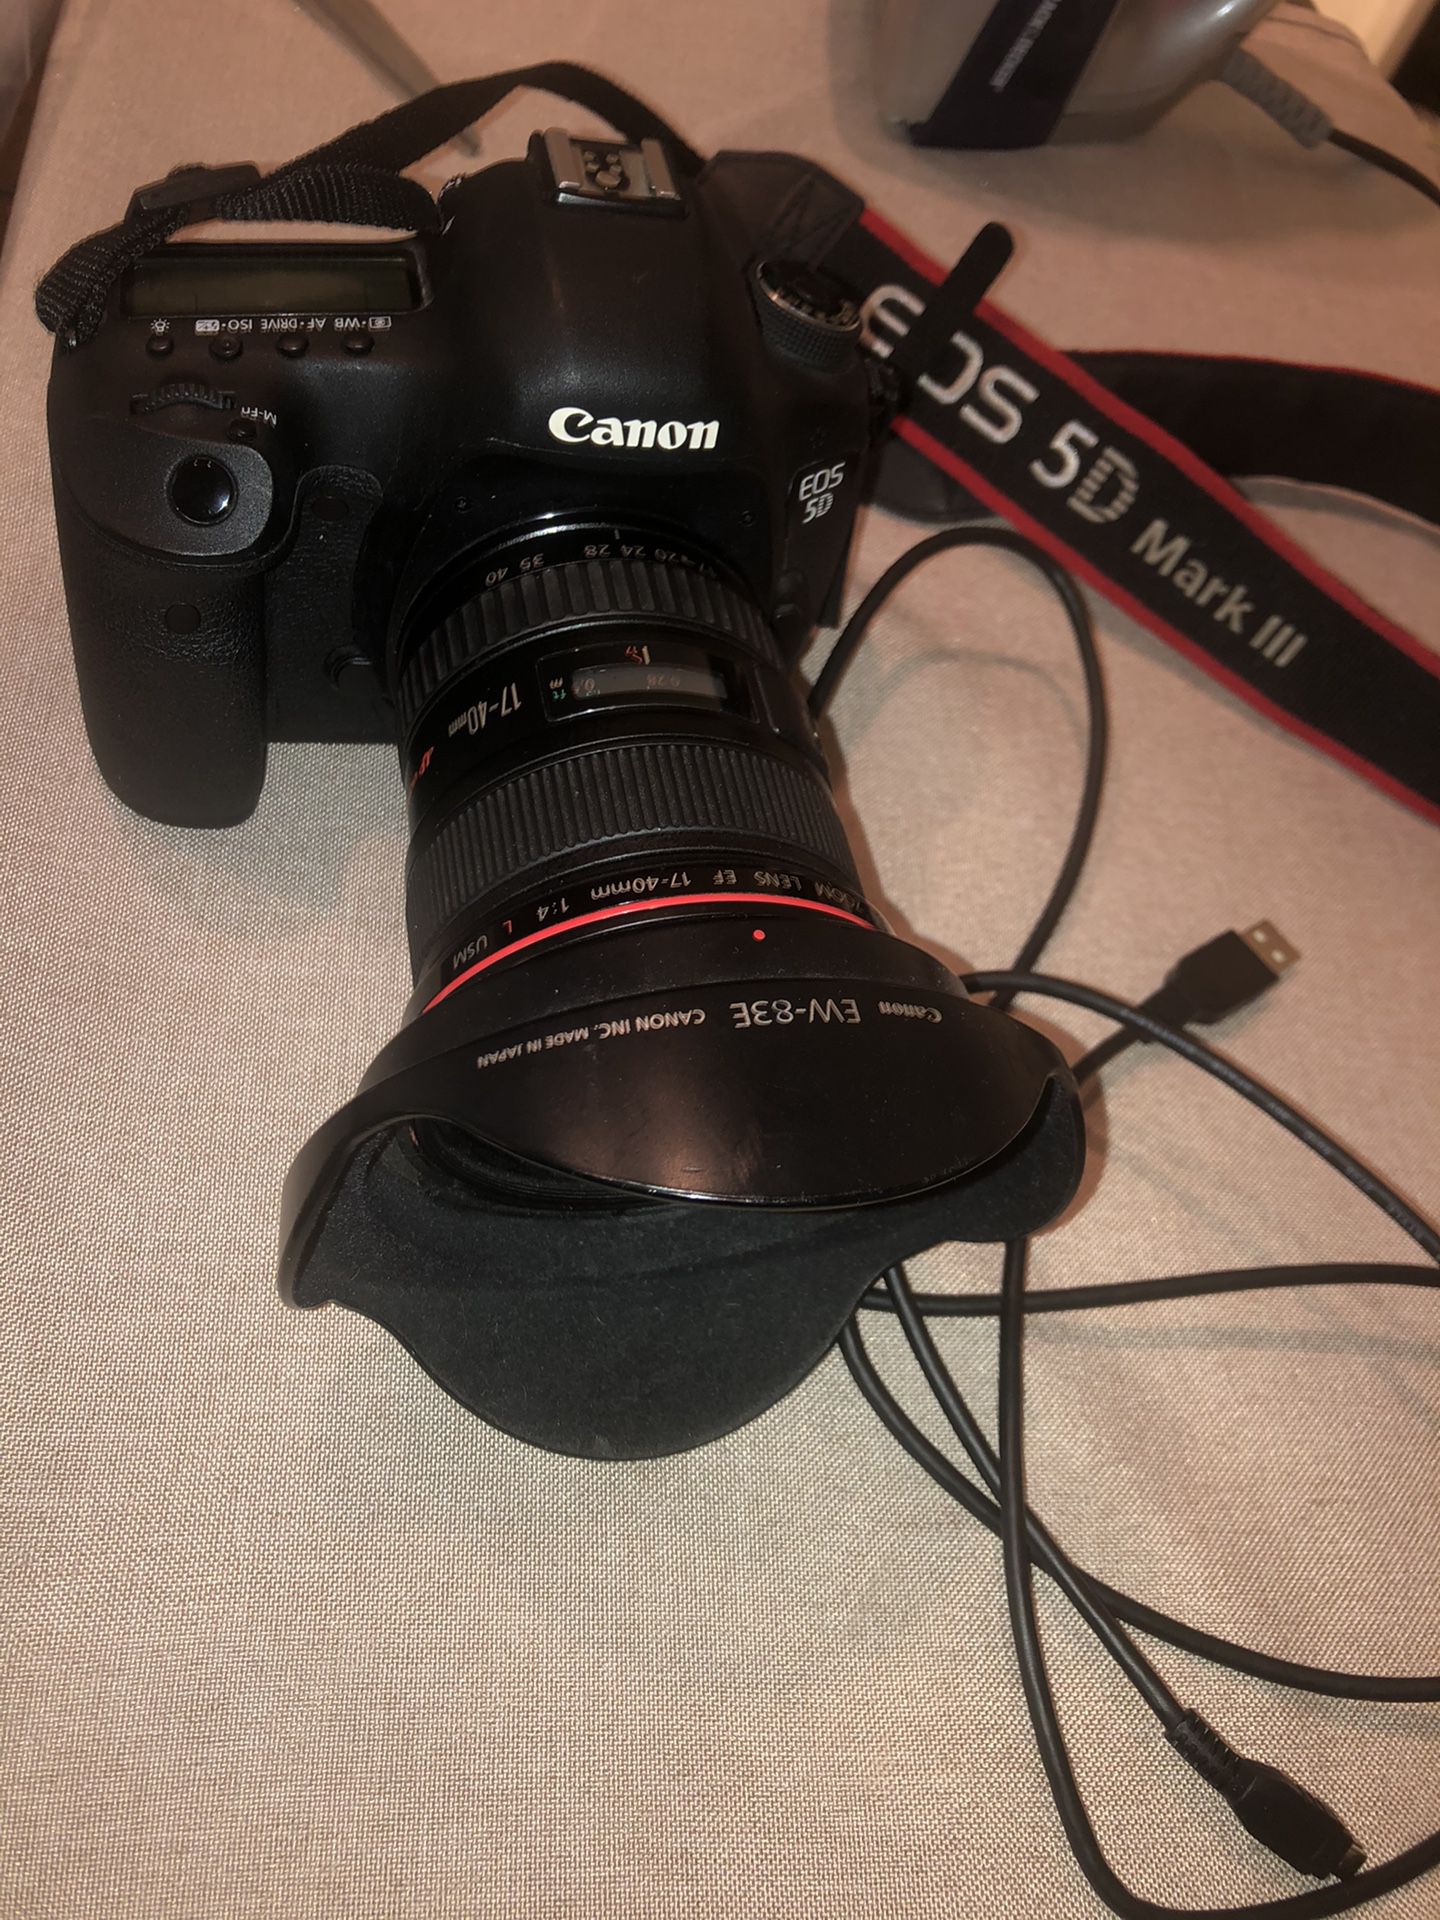 CANON CAMERA EOS 5D MARK III WITH 17-40mm LENTS